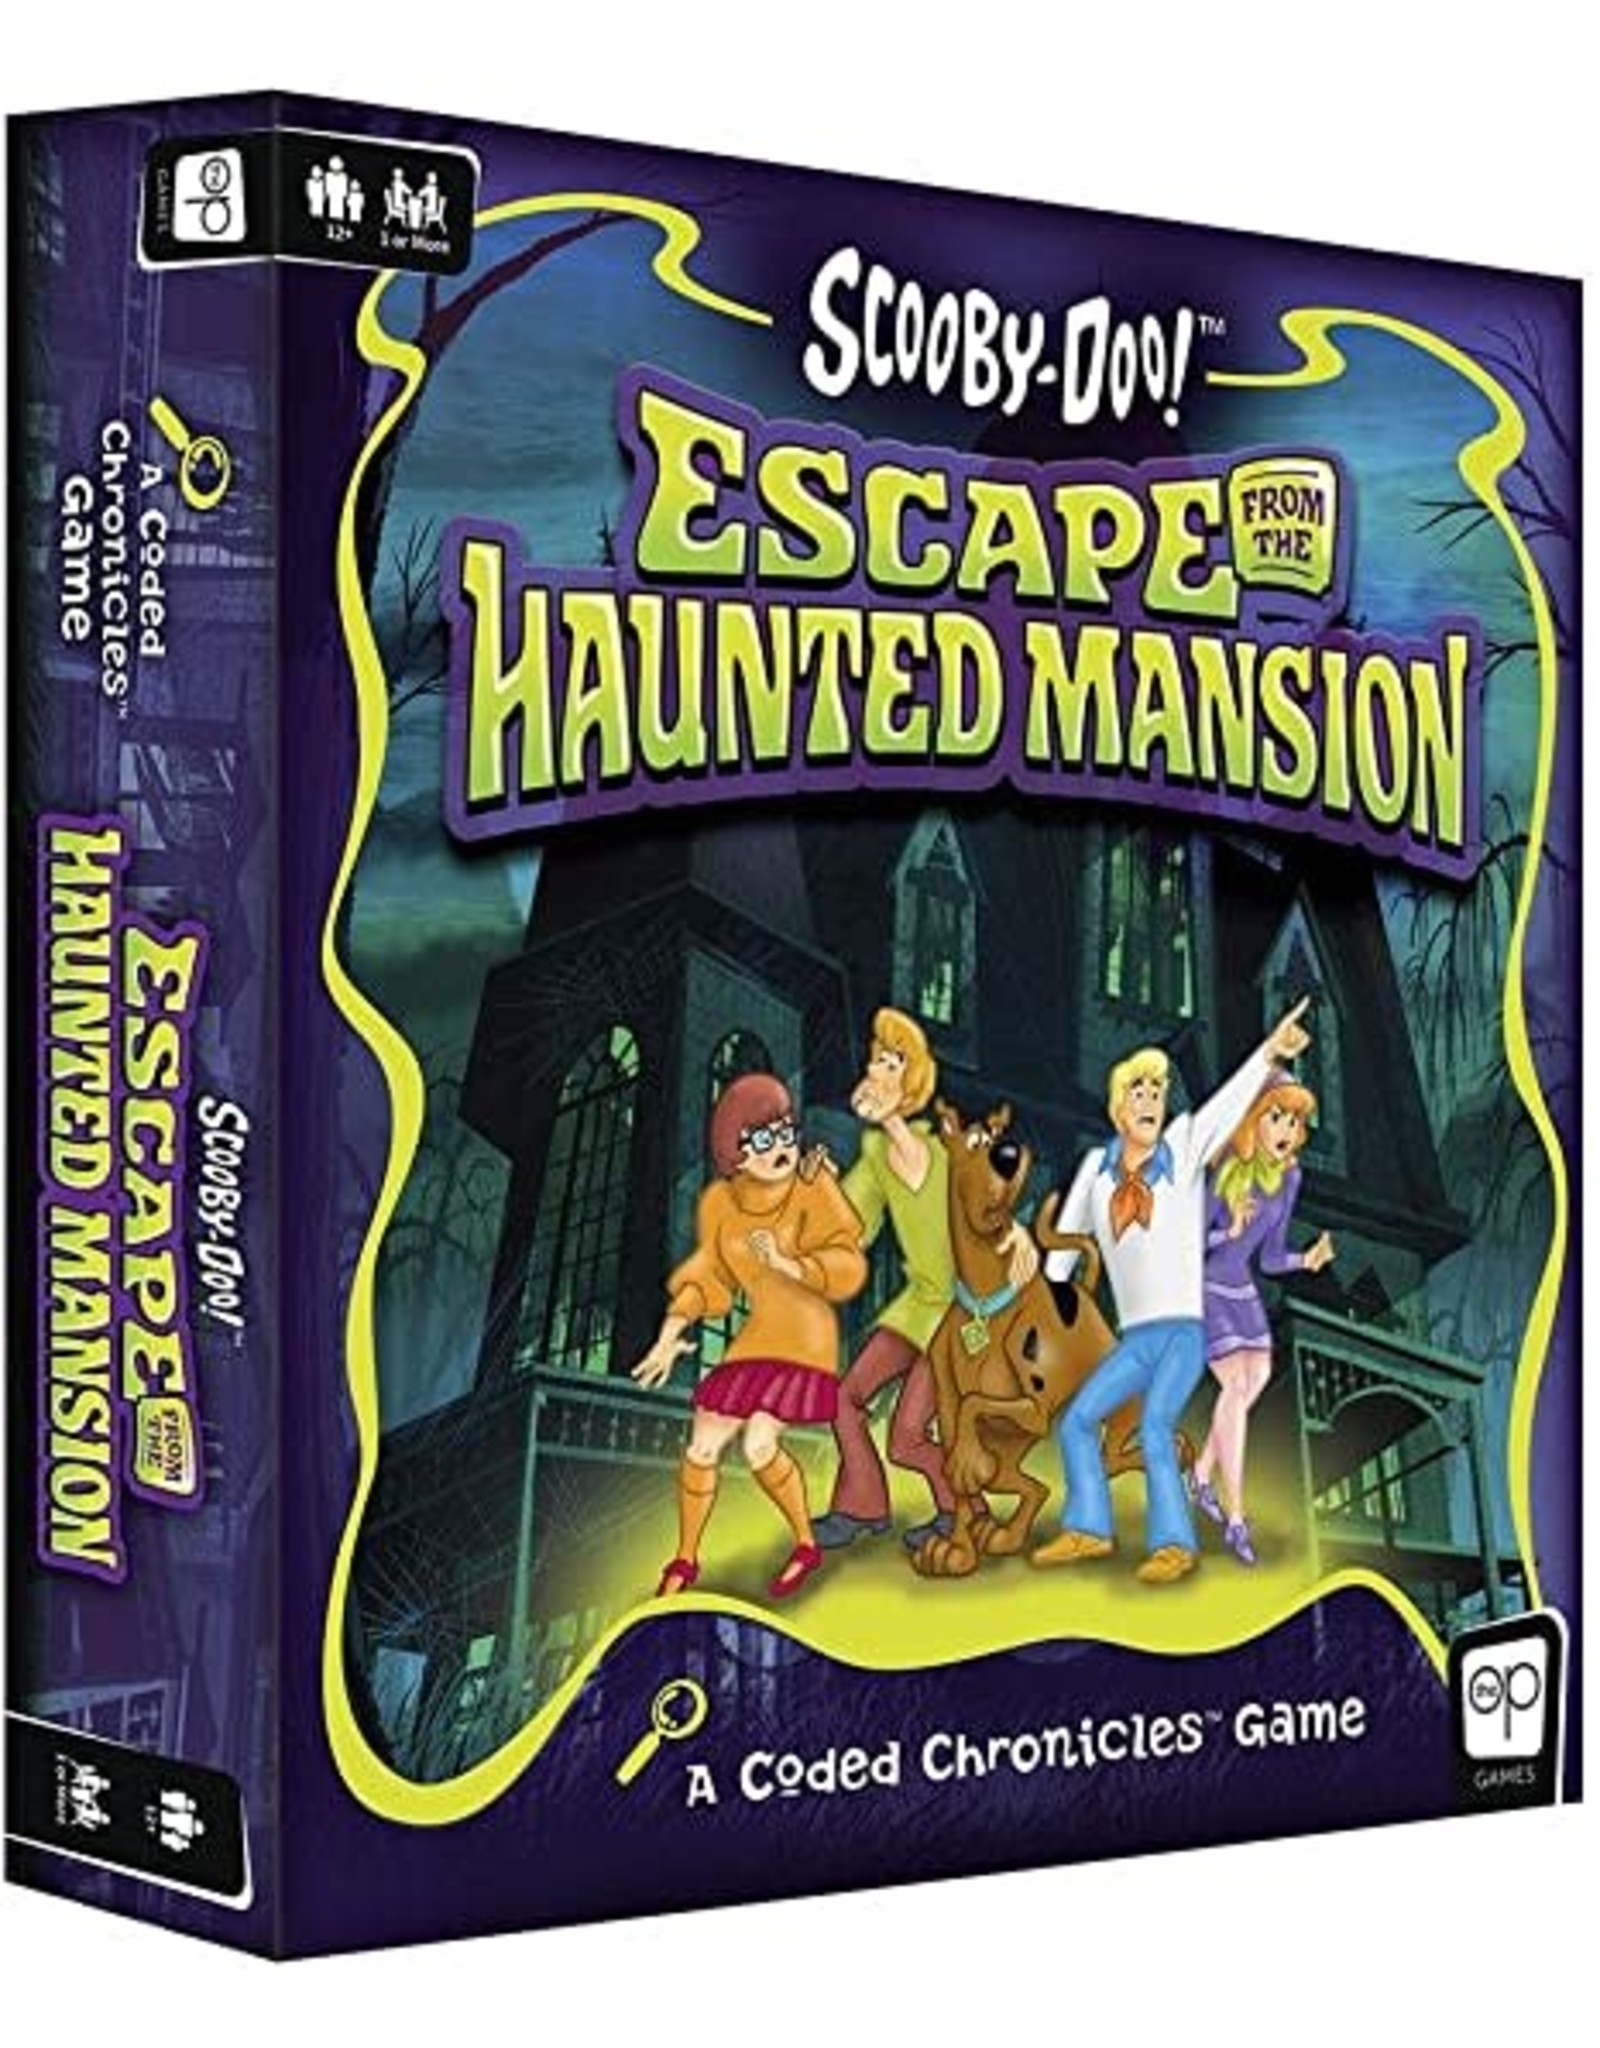 USAopoly Coded Chronicles: Scooby Doo!